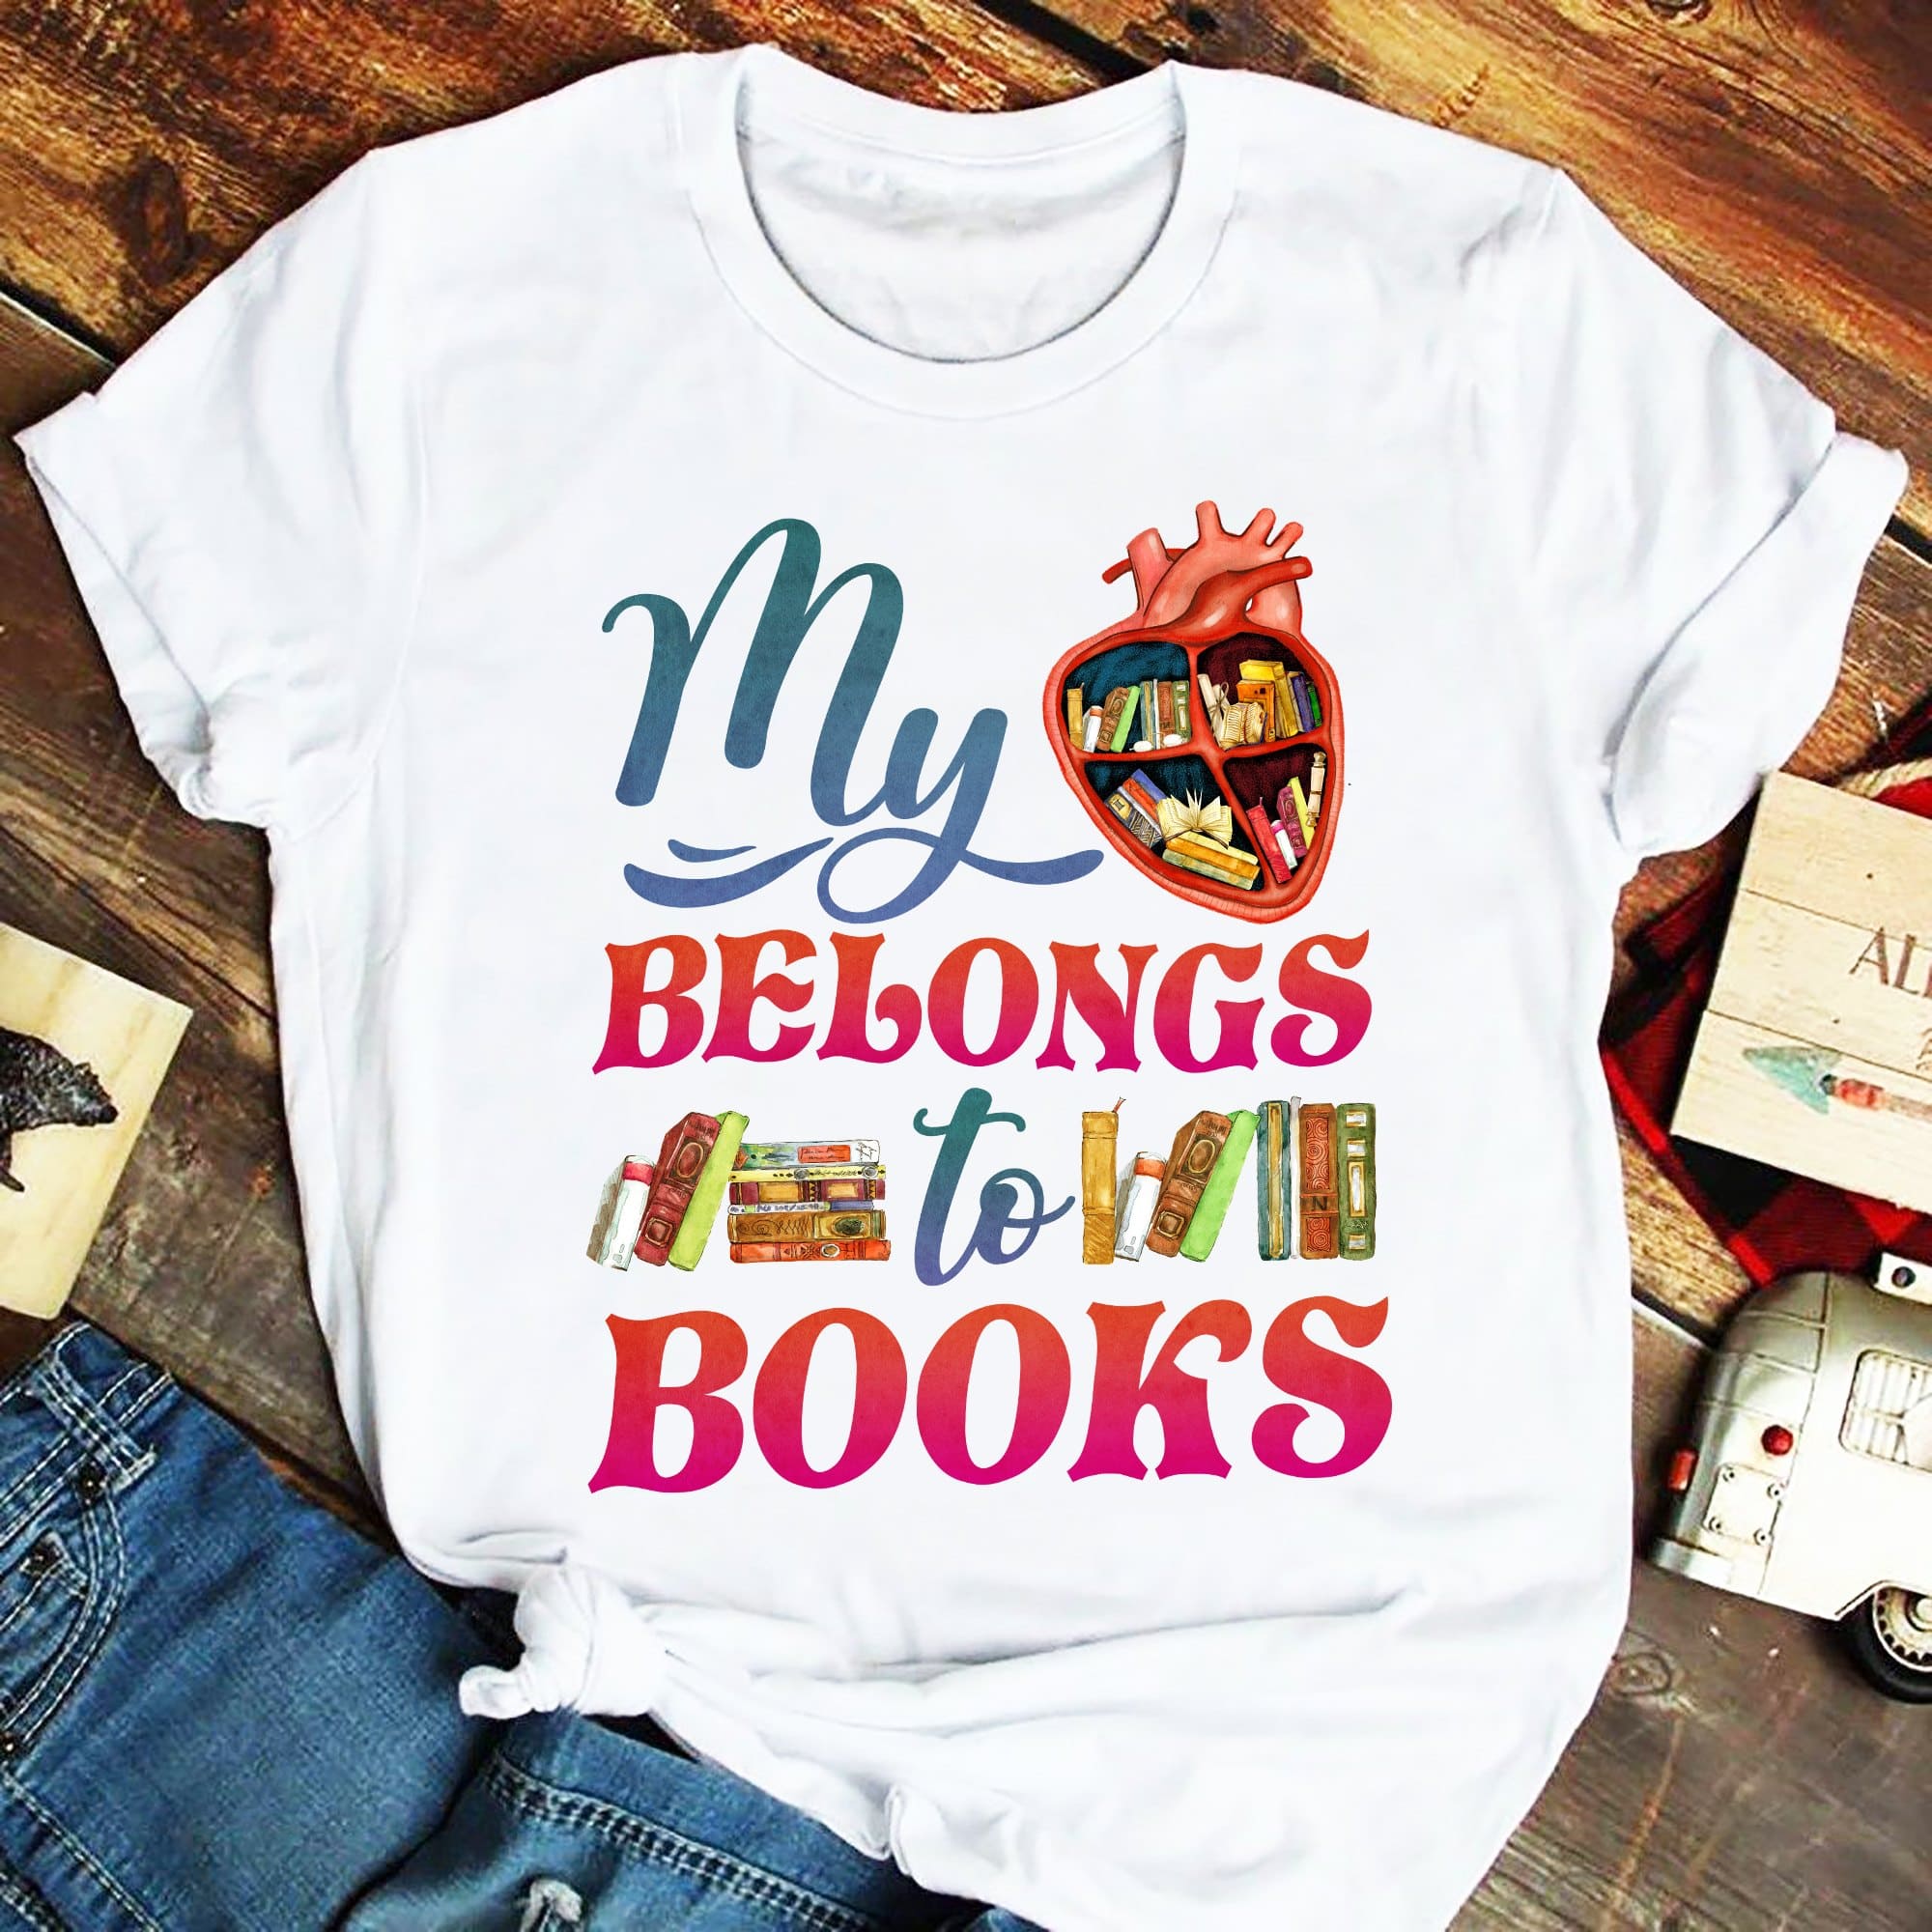 My heart belongs to books - Gift for book reader, love reading books